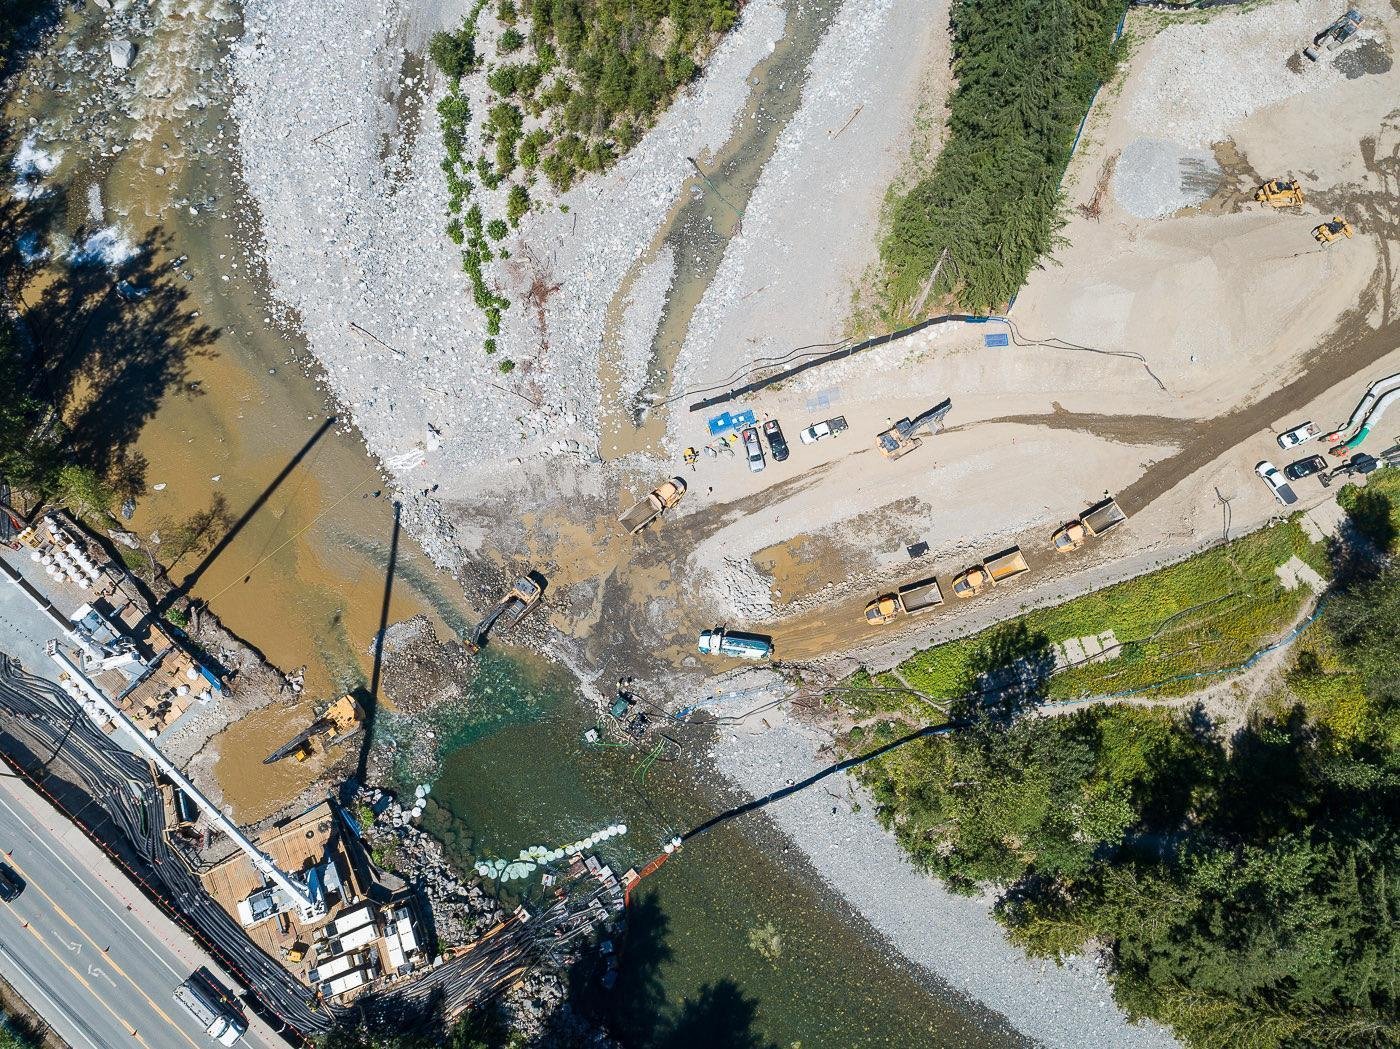 A birdseye view of a Trans Mountain worksite in Hope, B.C.. Excavators can be seen digging in the water, and downstream, in the upper left corner of the image the water is very muddy and turbulent due to pumps transporting water downstream.